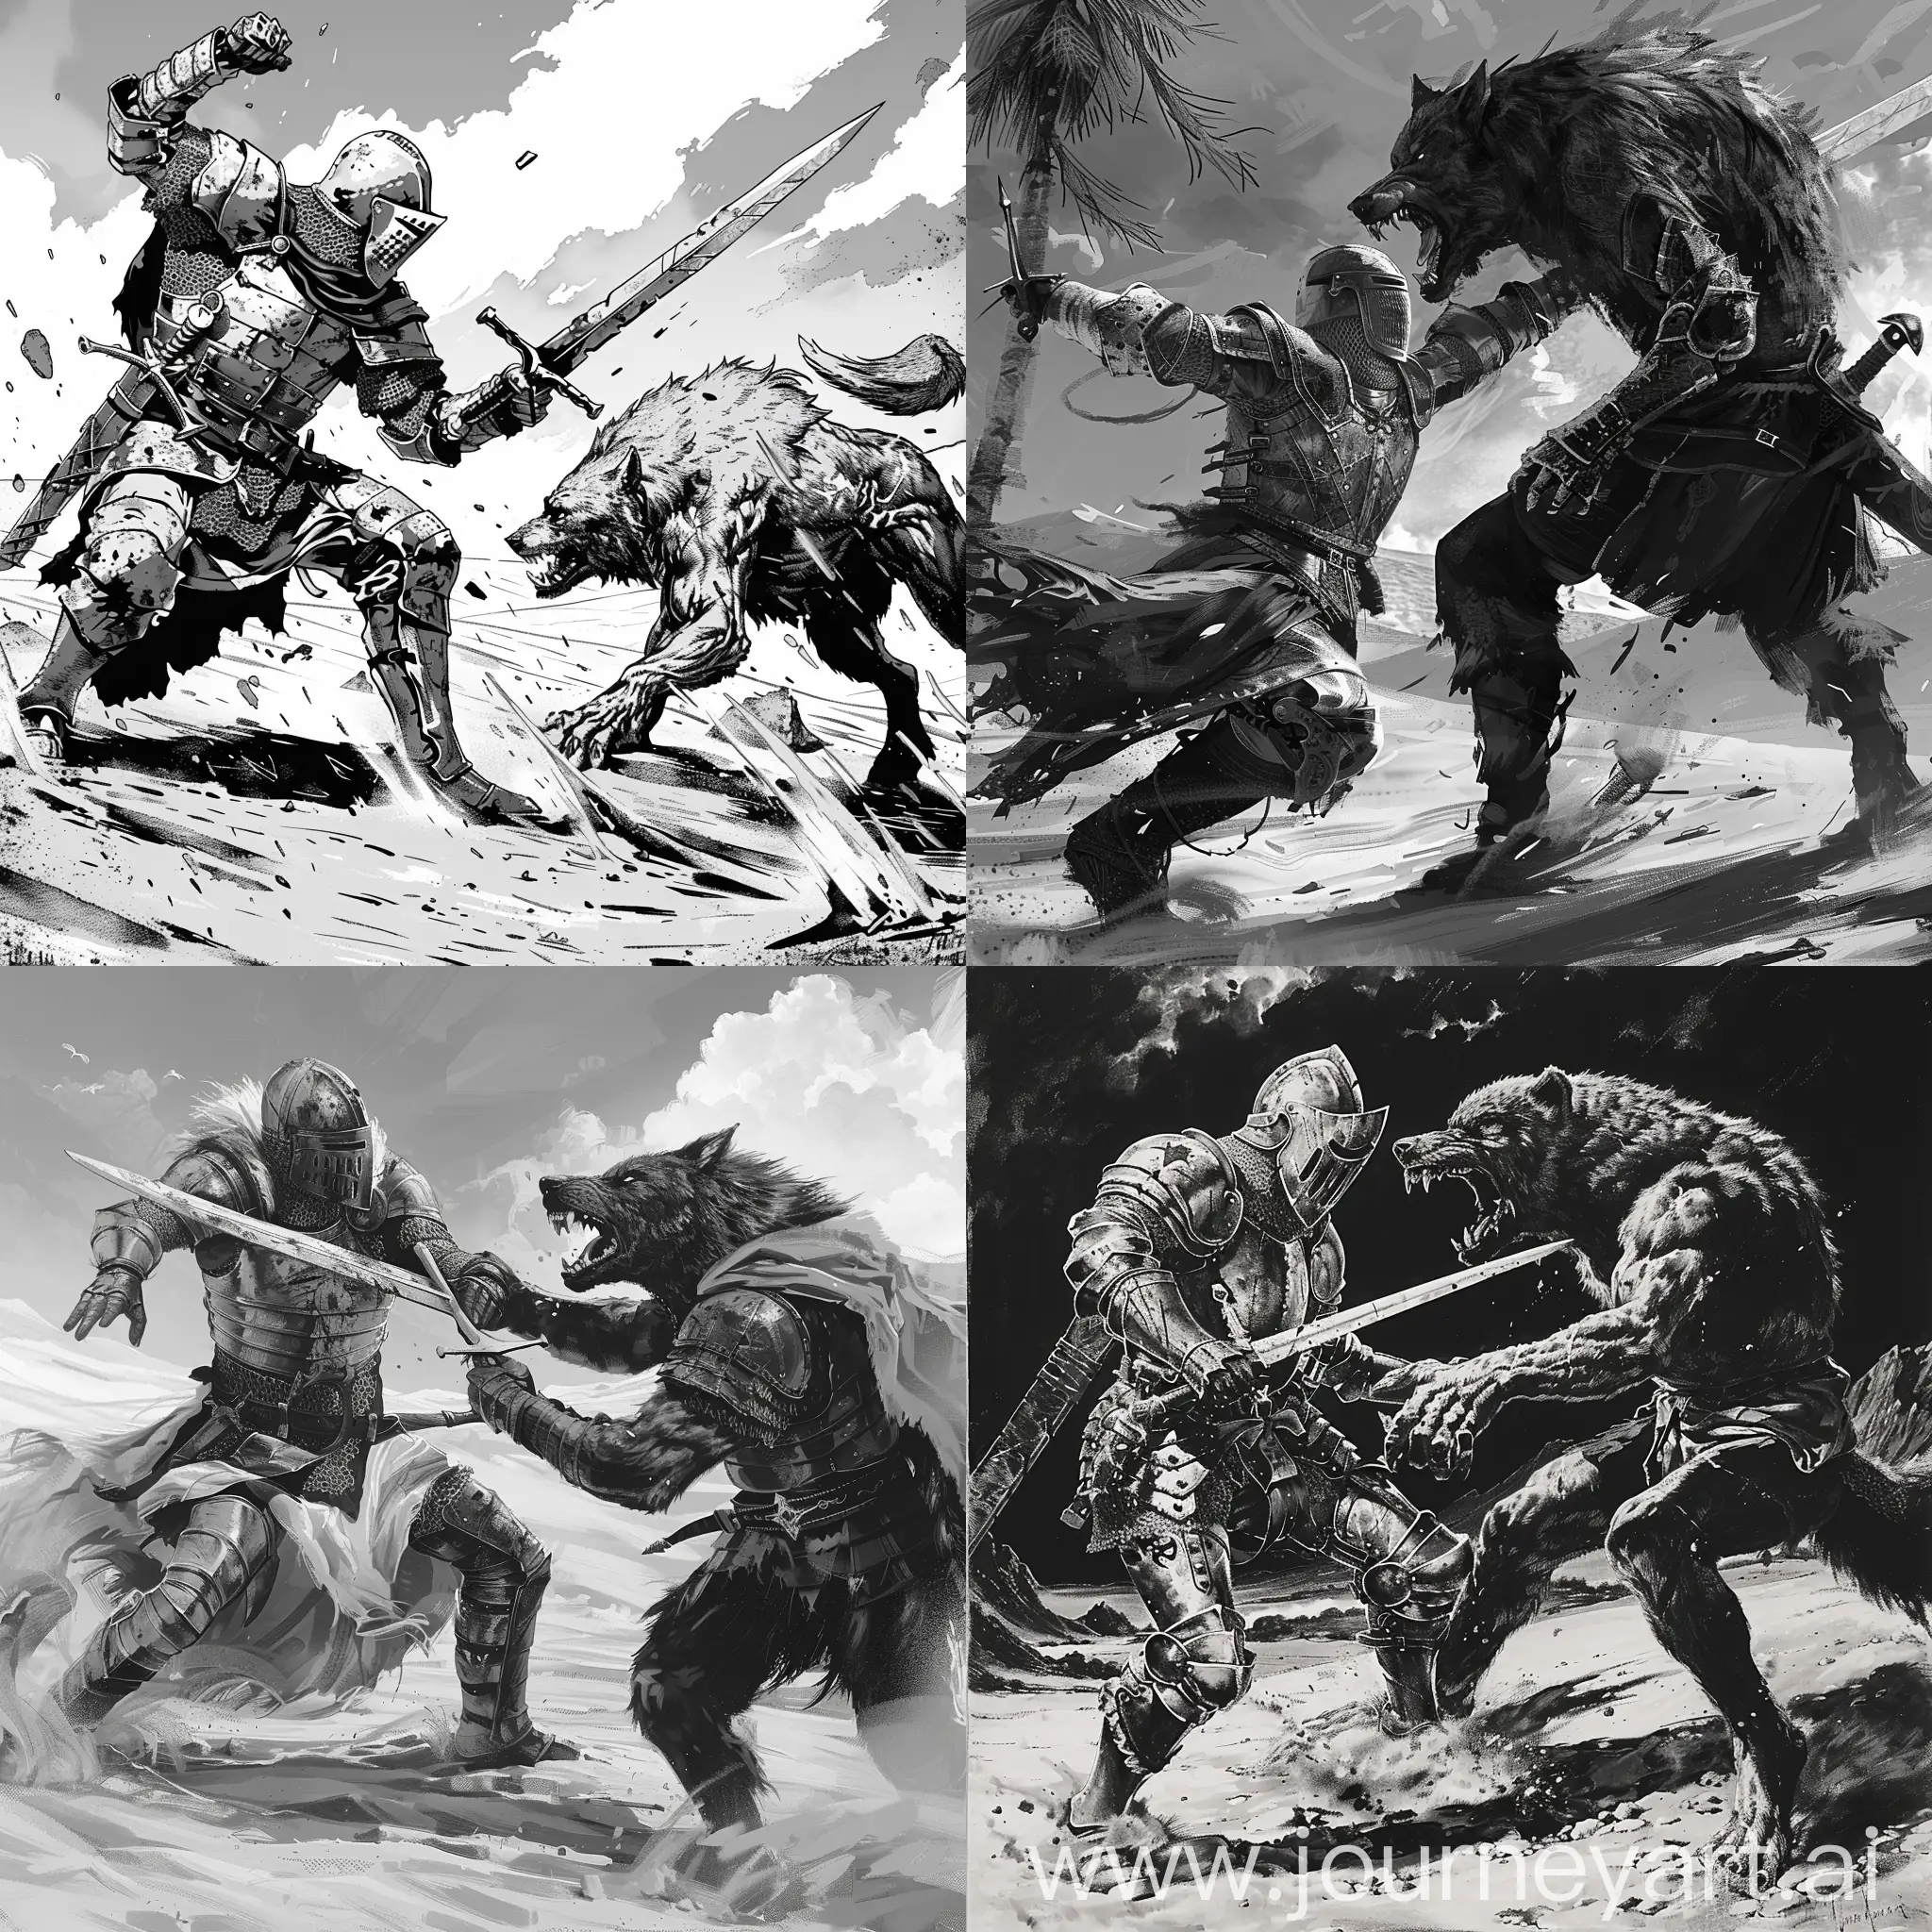 A crusader knight fight with a werewolf at dune, black and white, berserk style